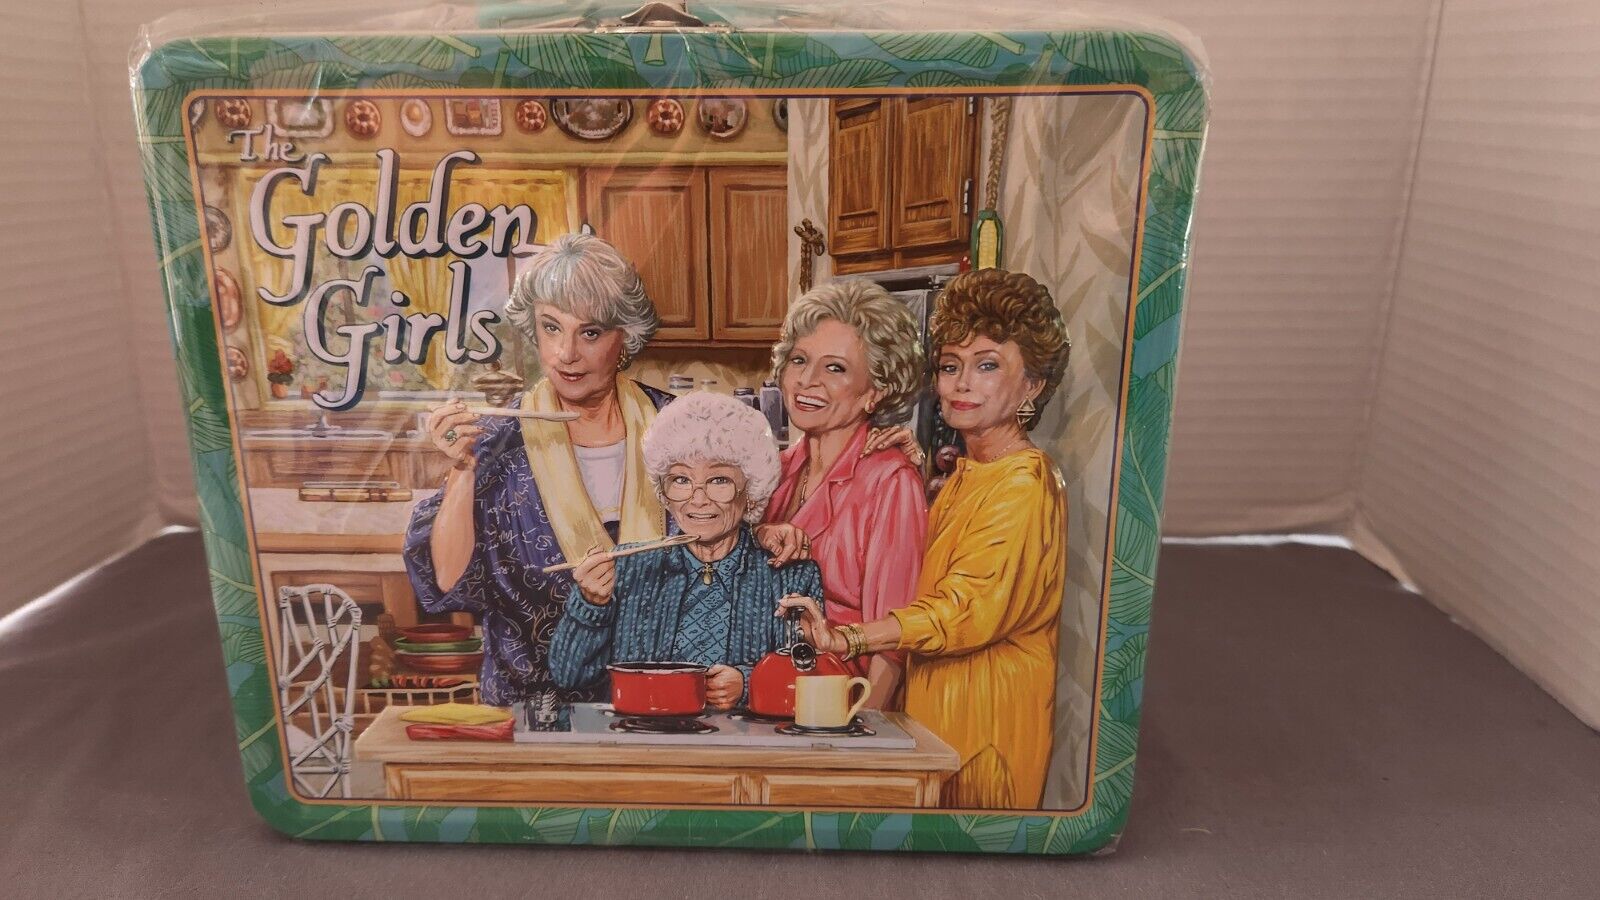 Golden Girls Lunchbox * NEW in Wrapper* RETRO COLLECTIBLE Tonka Toys🤗🤗🤗